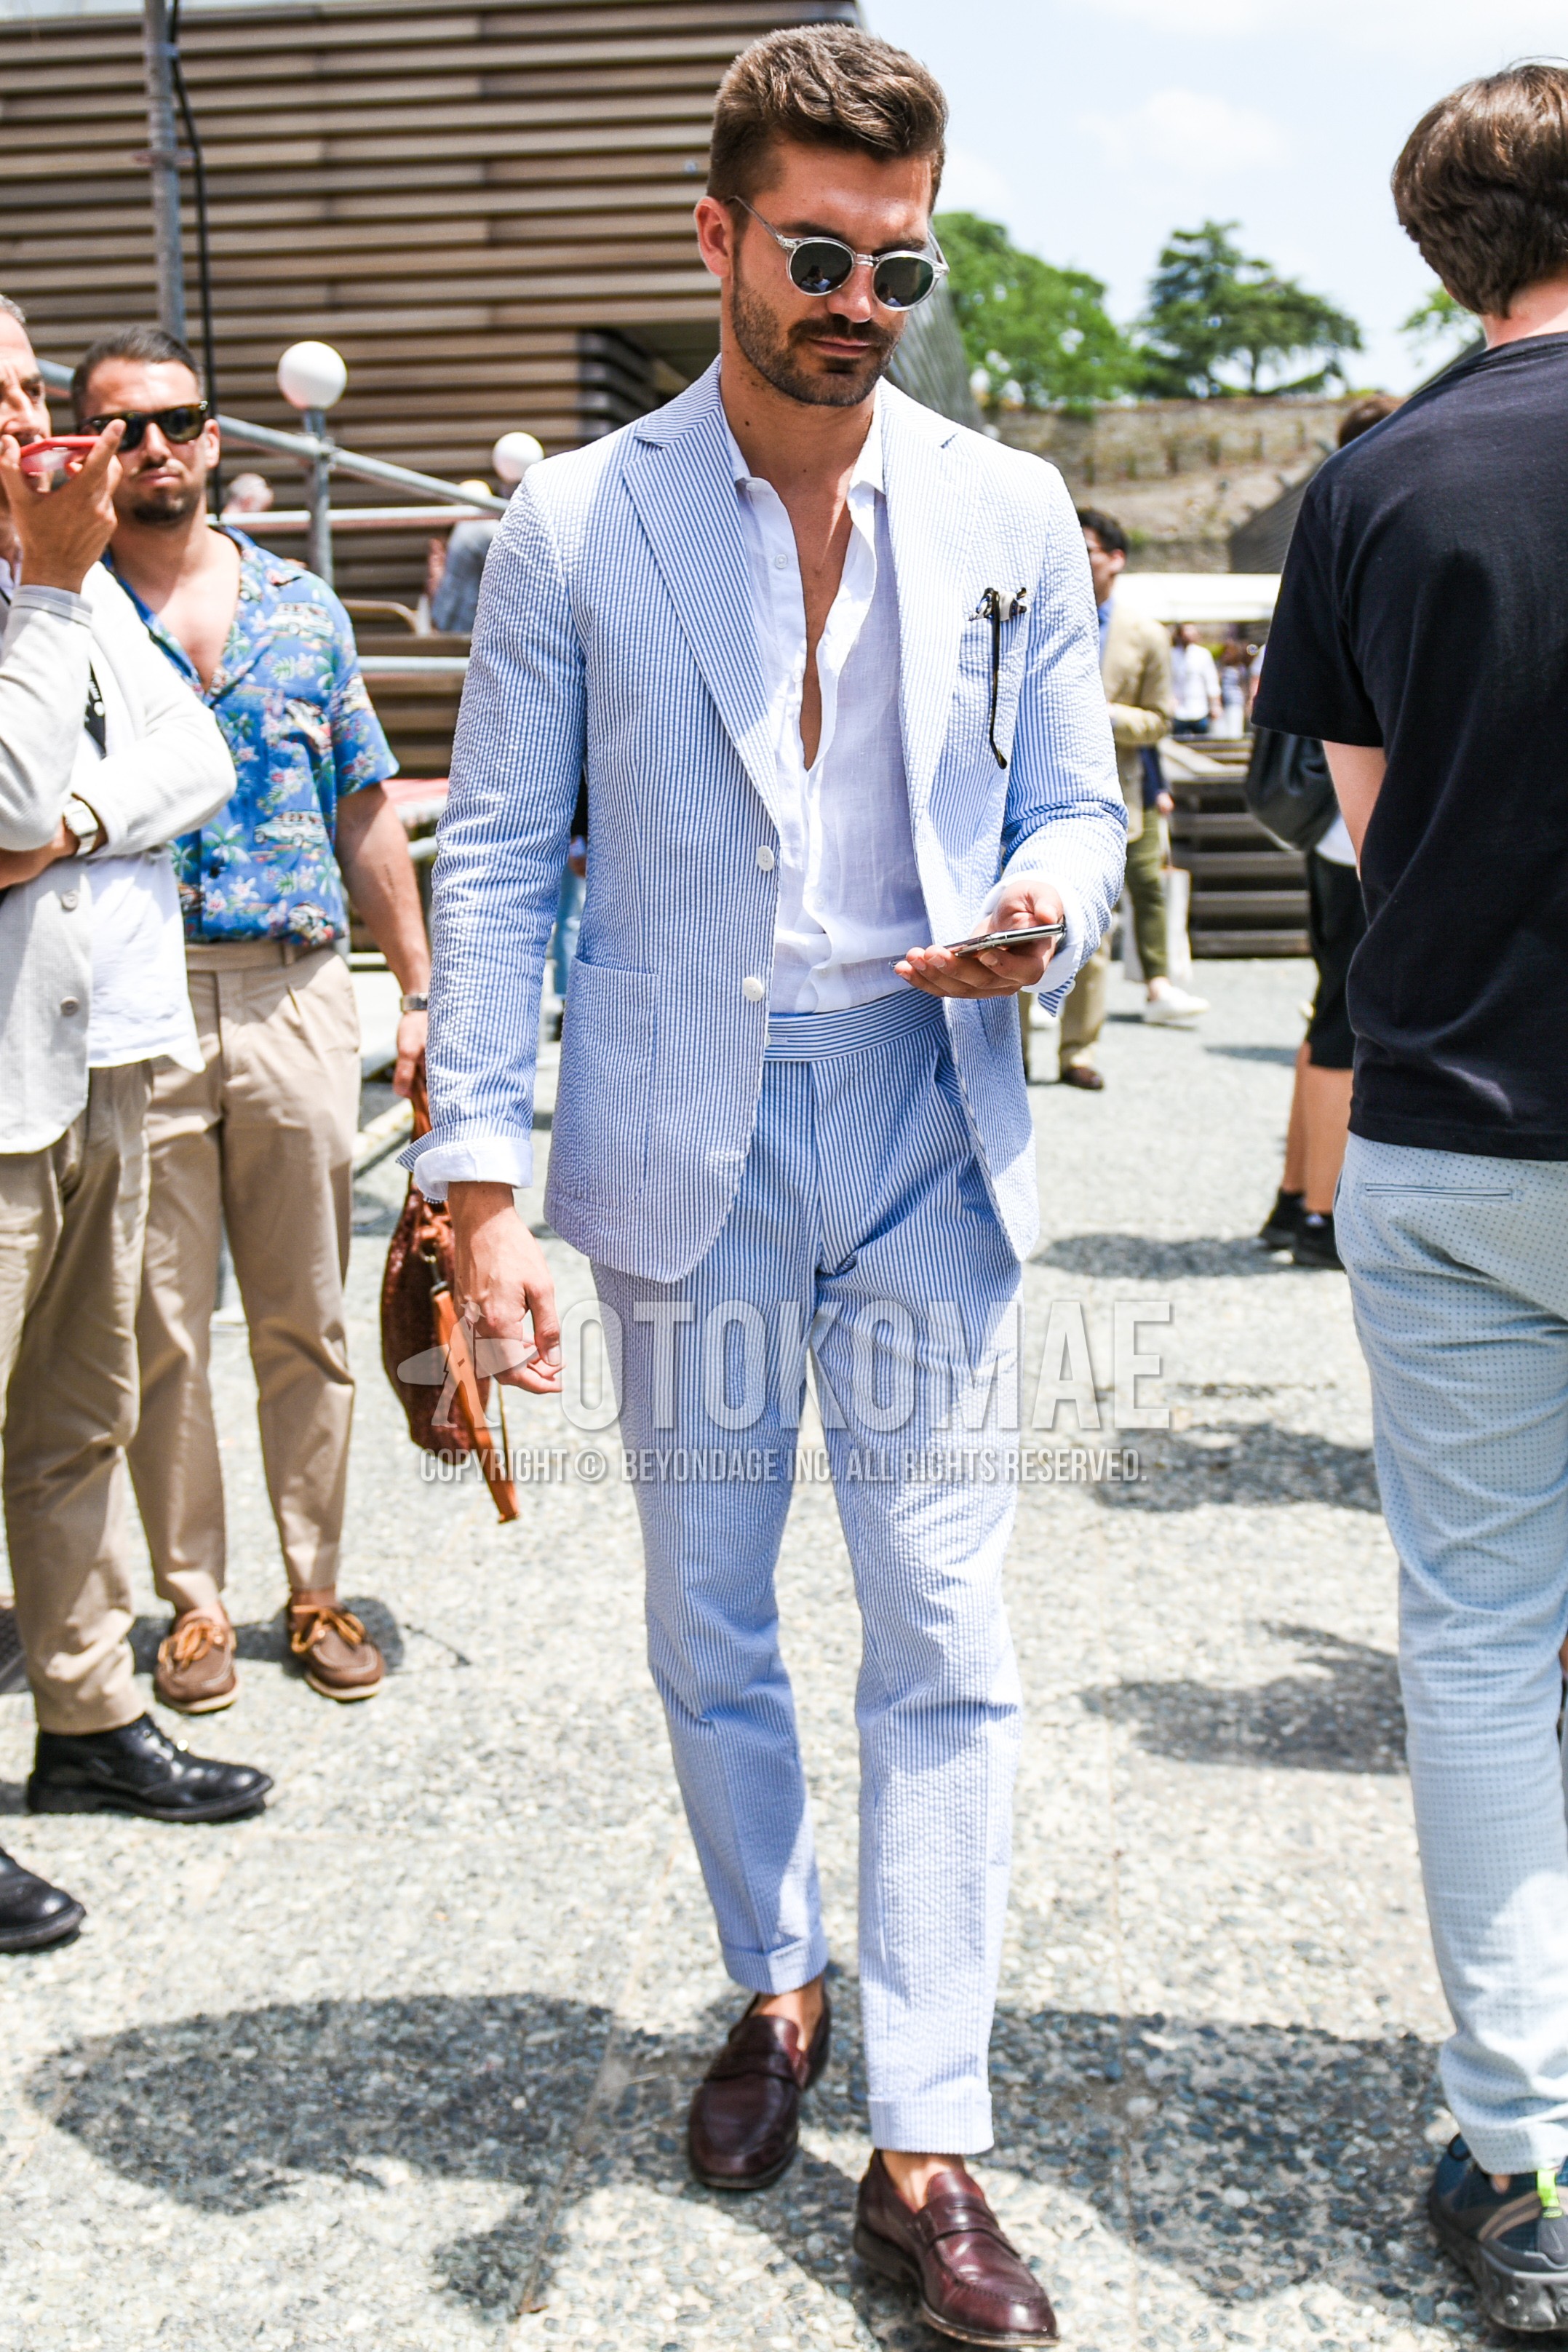 Men's summer outfit with clear plain sunglasses, white plain shirt, brown coin loafers leather shoes, light blue stripes suit.